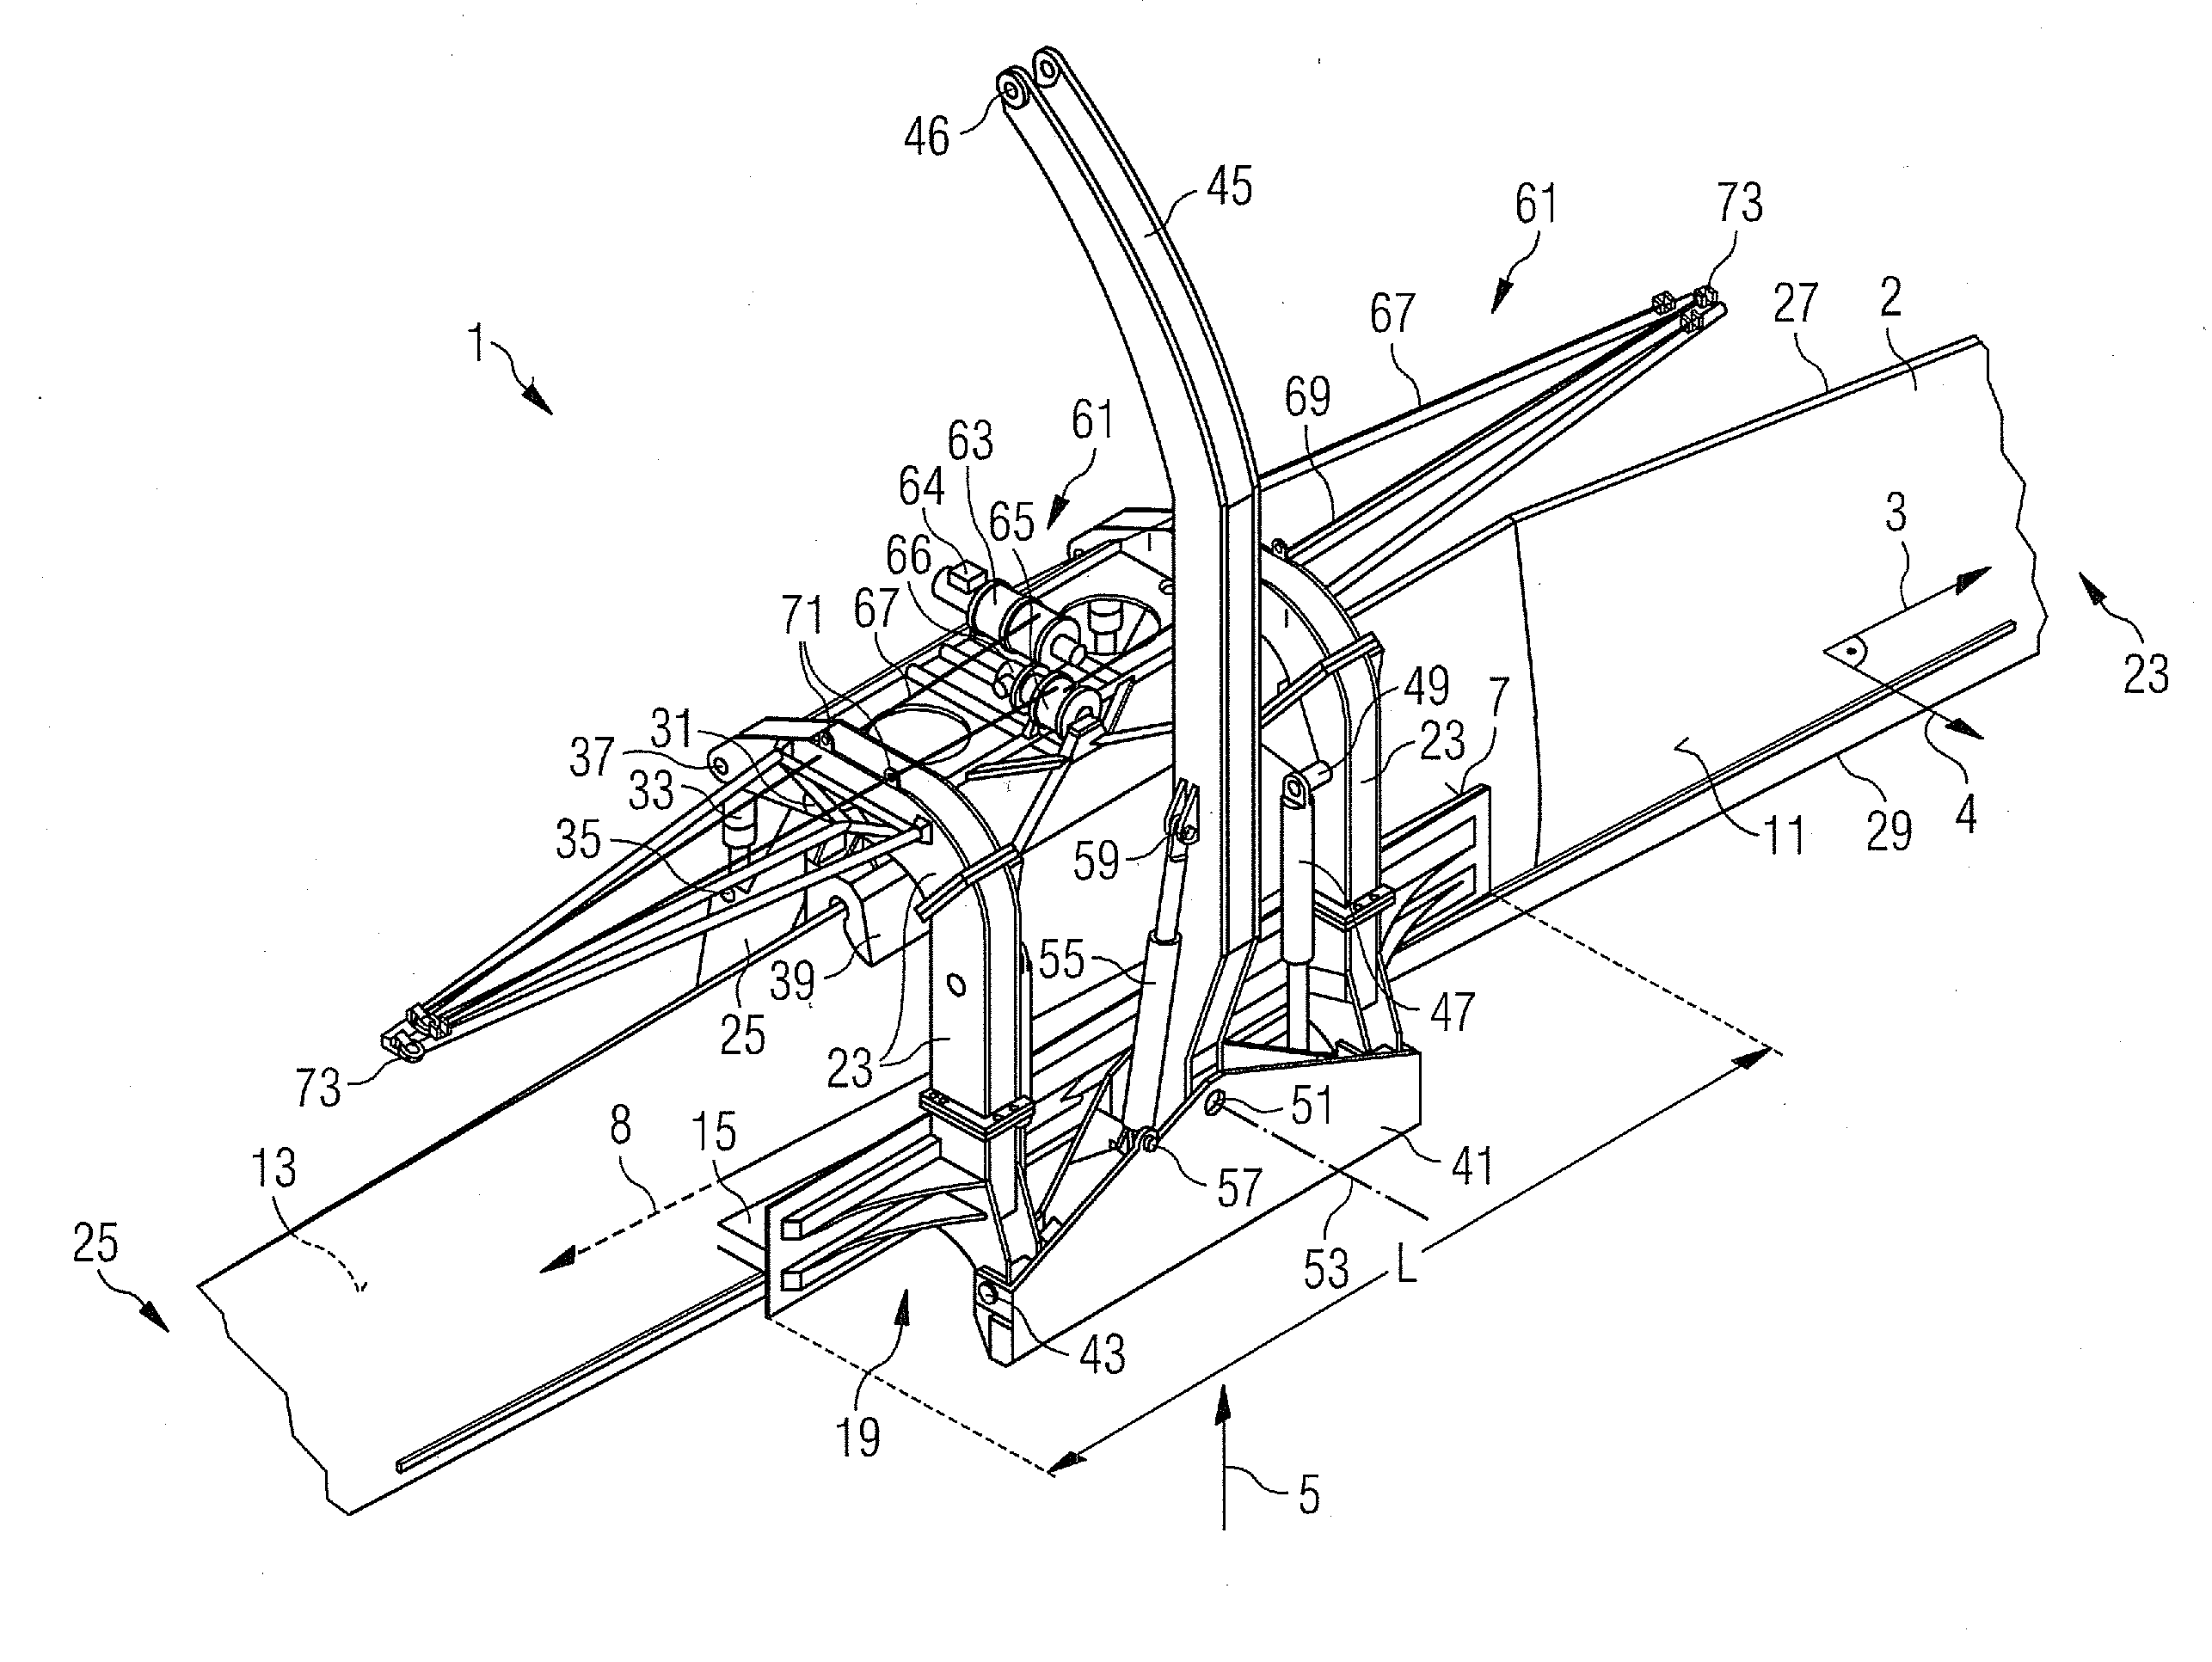 Clamp for clamping a blade for a wind turbine and method of installing wind turbine blades